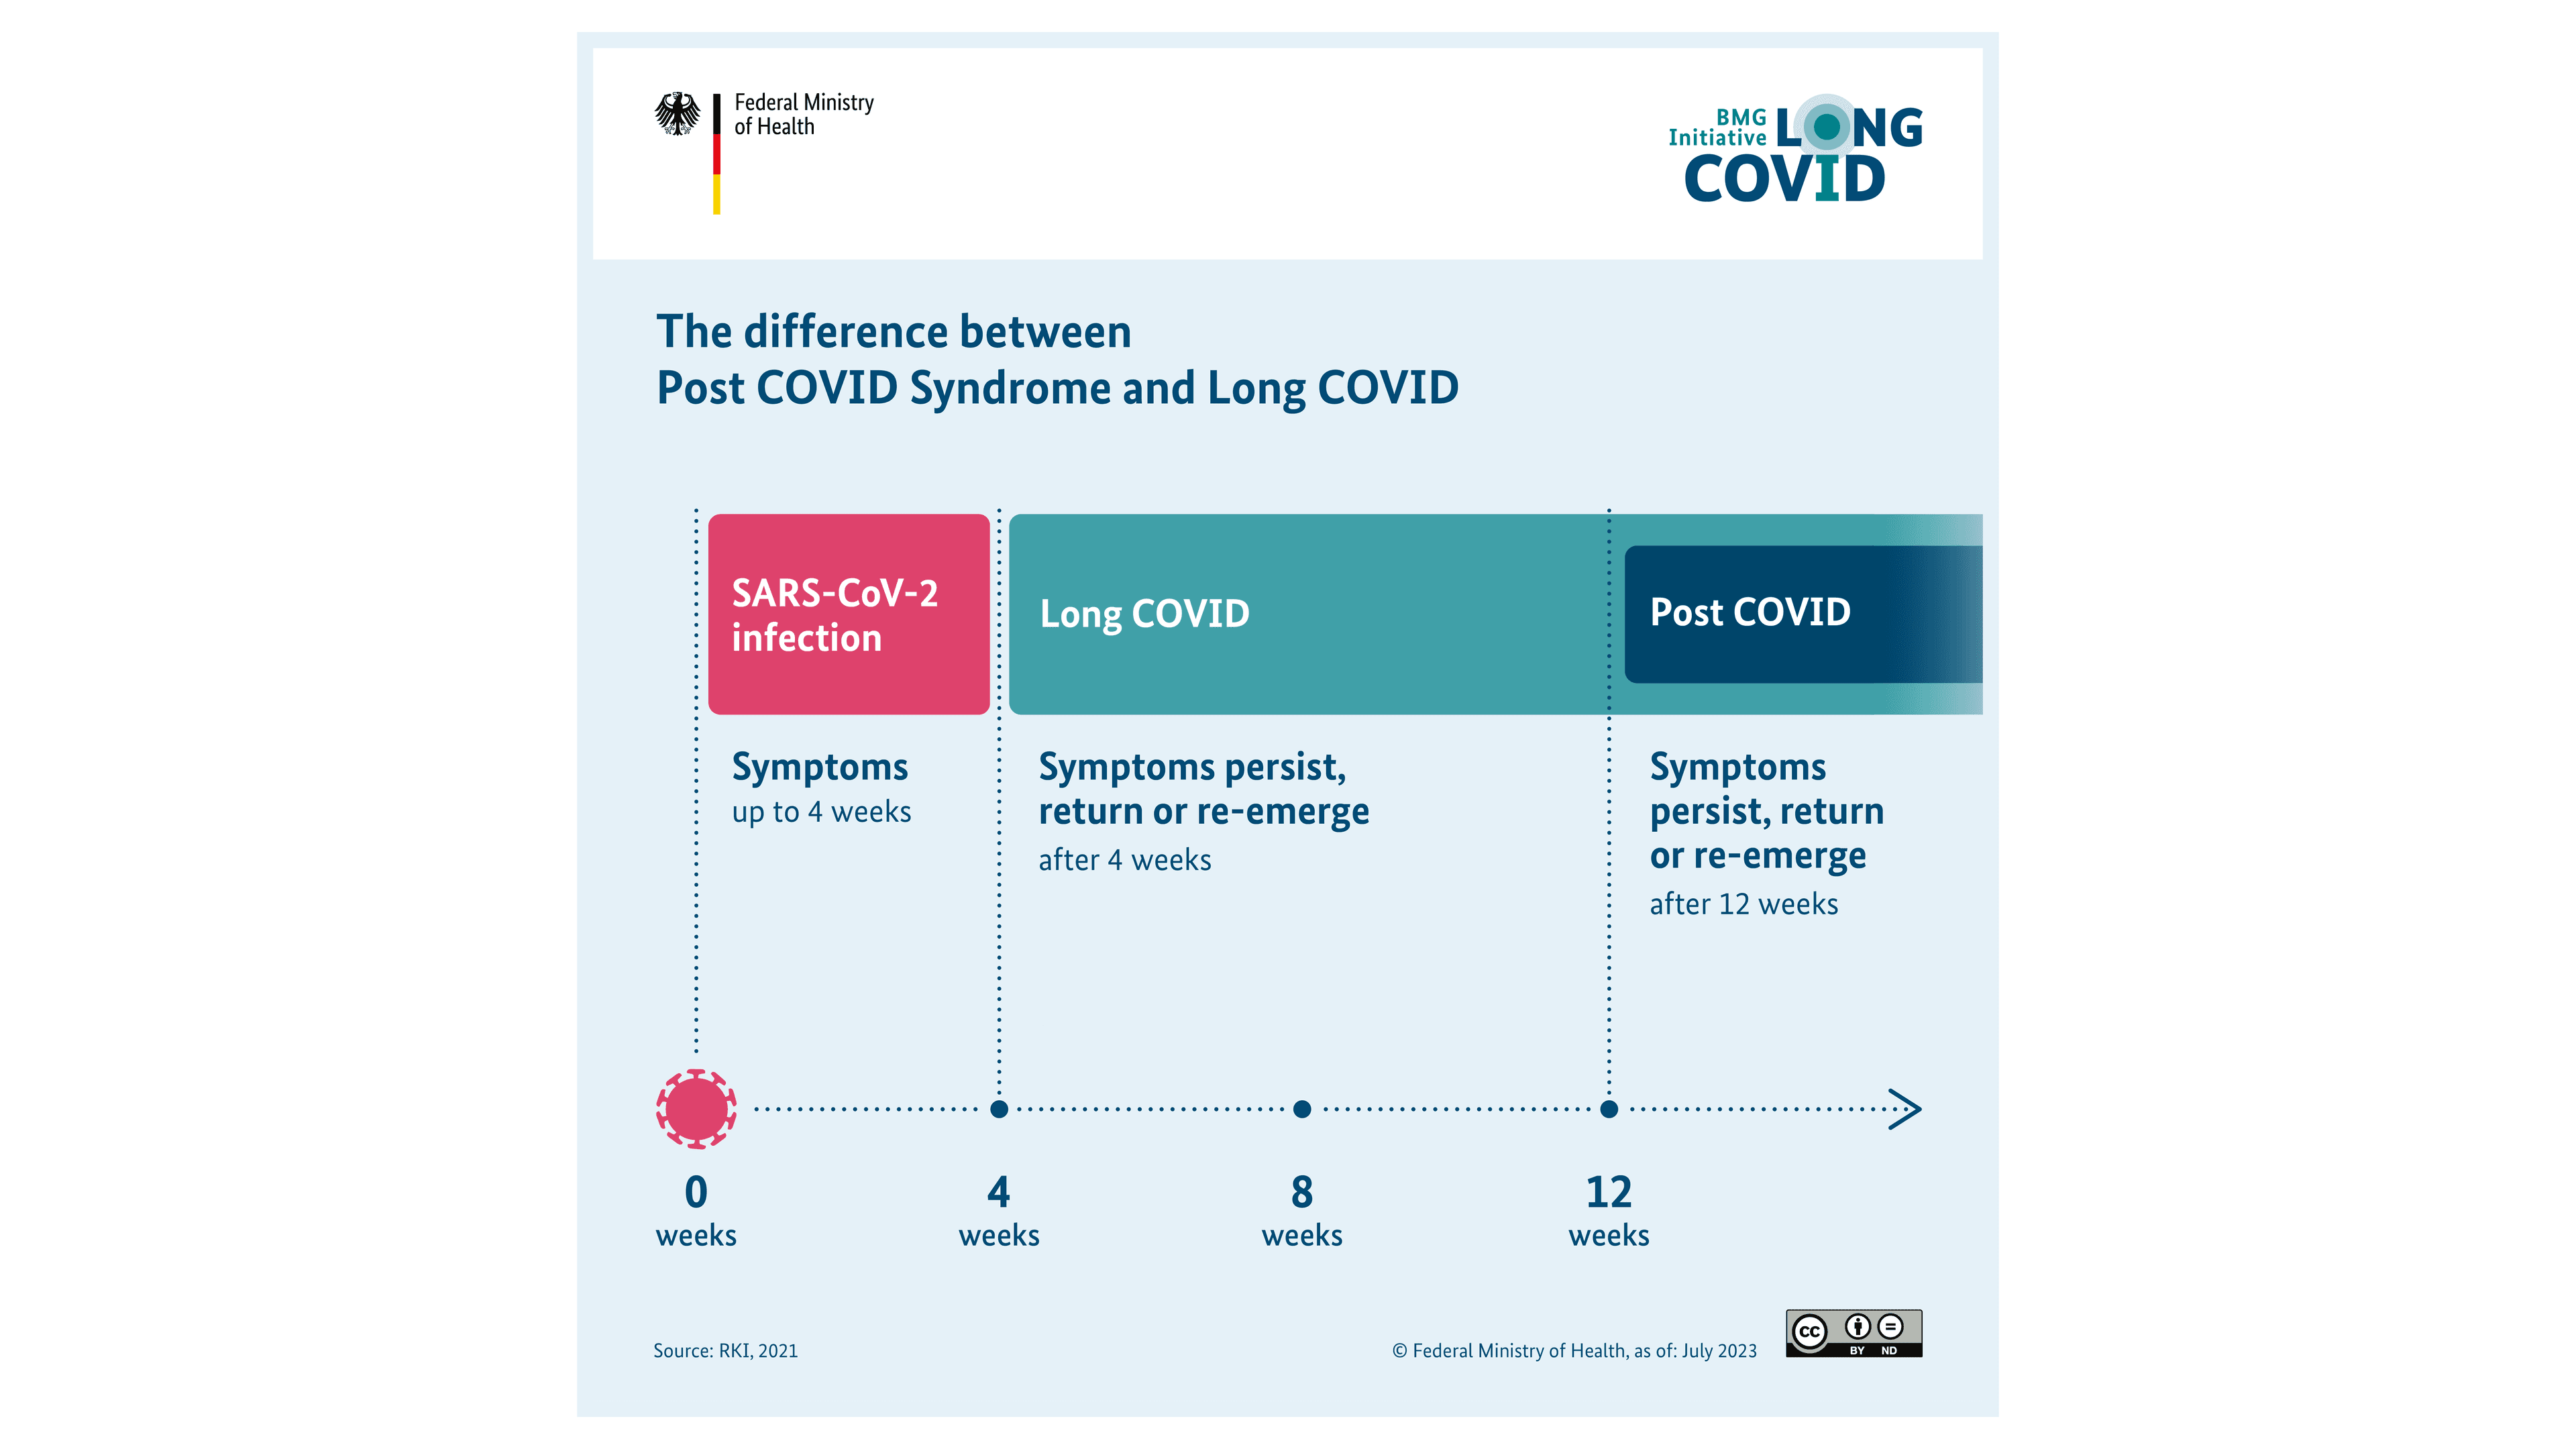 Diagram: Difference between Post COVID and Long COVID by means of chronological course of symptoms